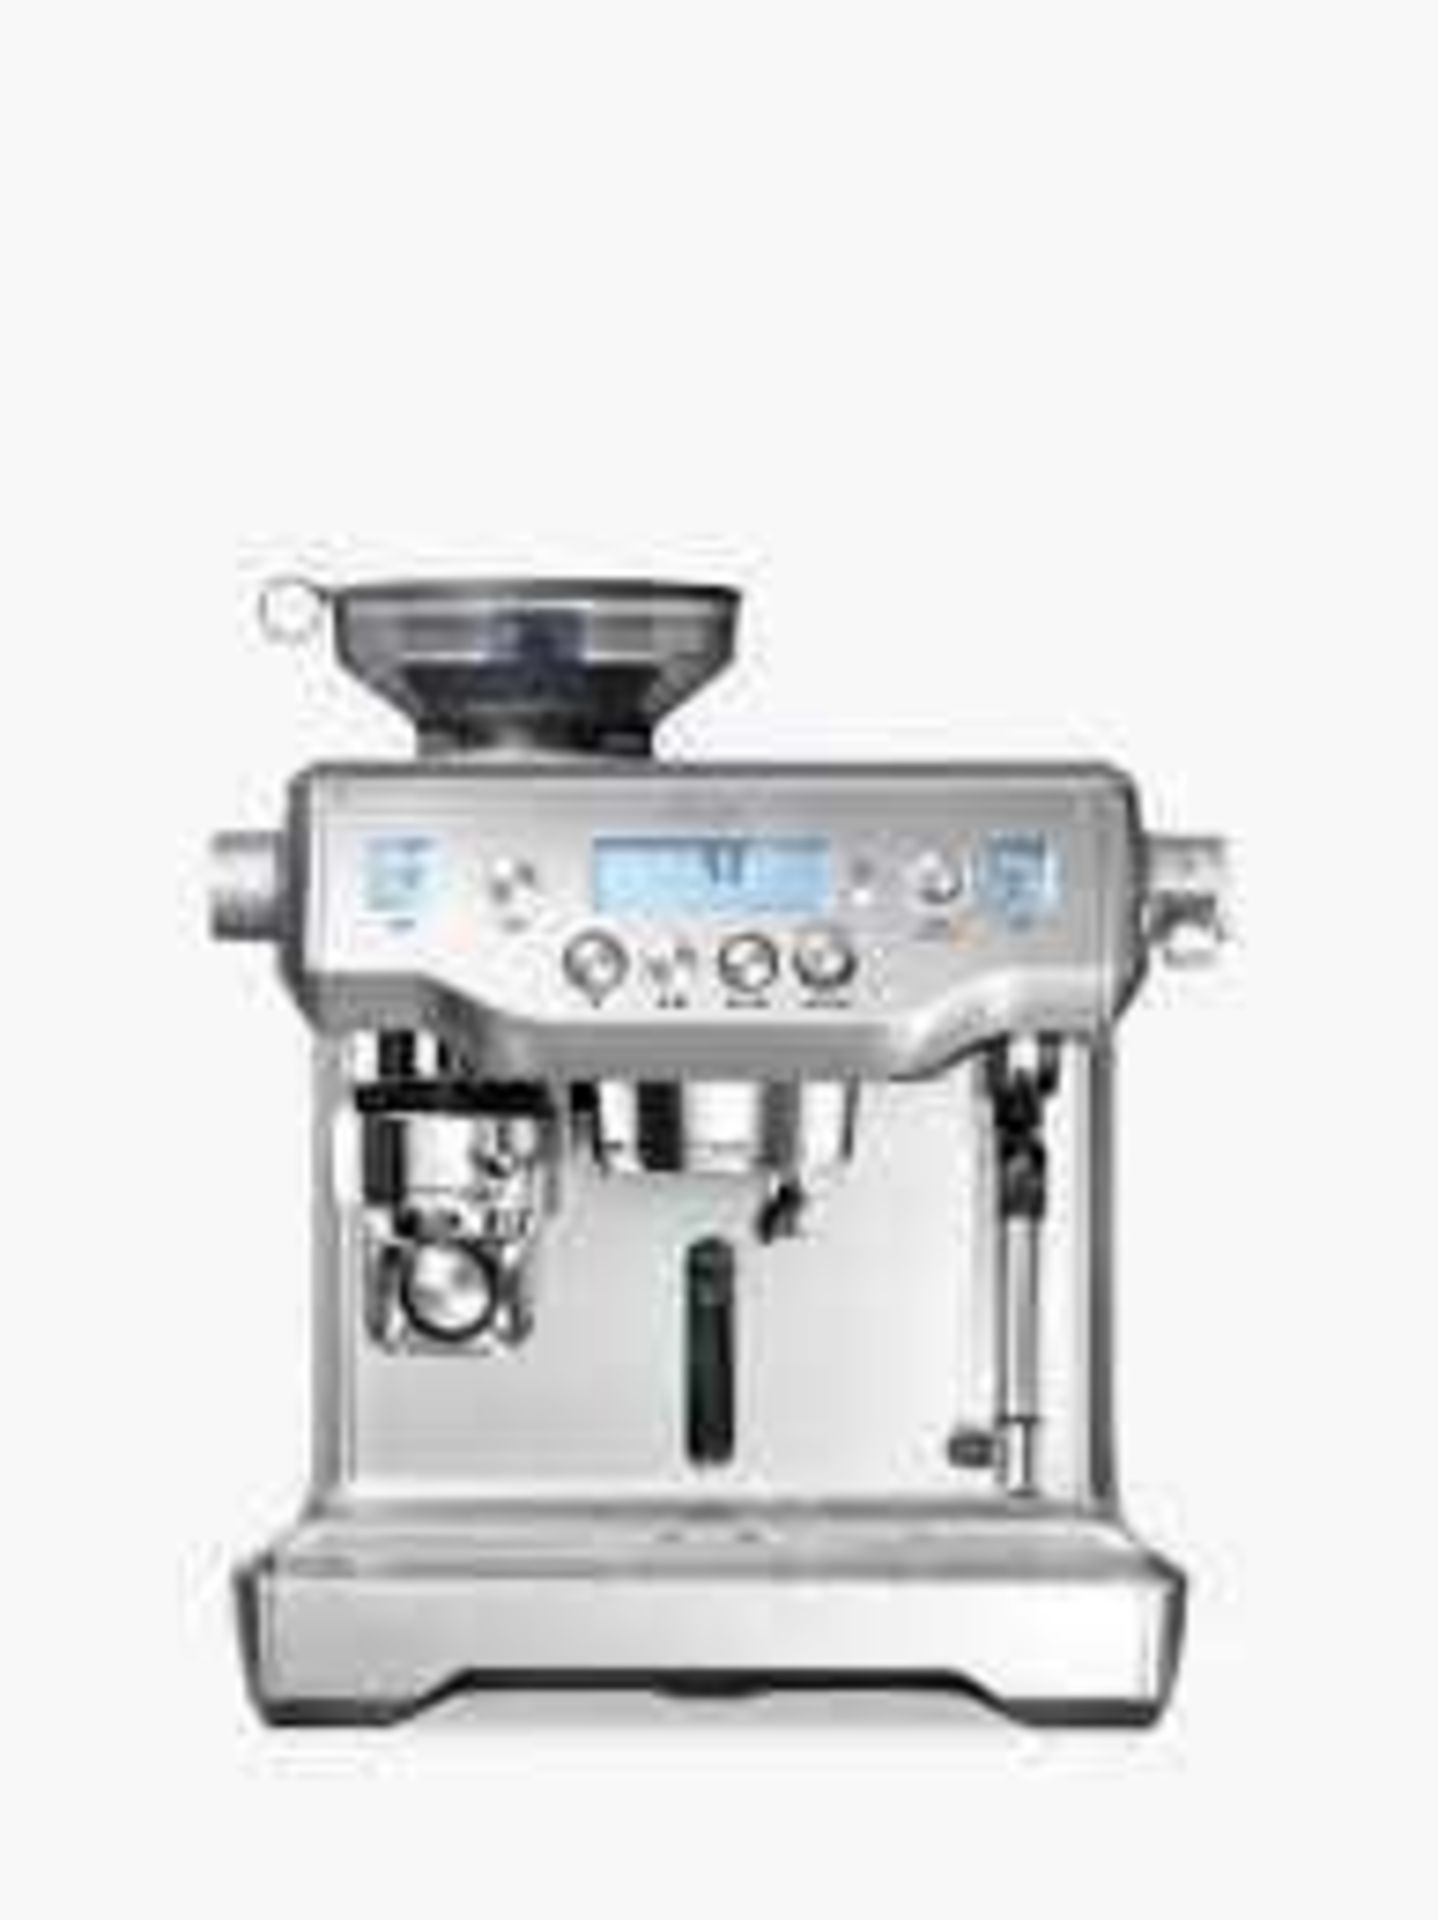 (Jb) RRP £600 Lot To Contain 1 Unpackaged Sage Deluxe Coffee Machine (01246937)